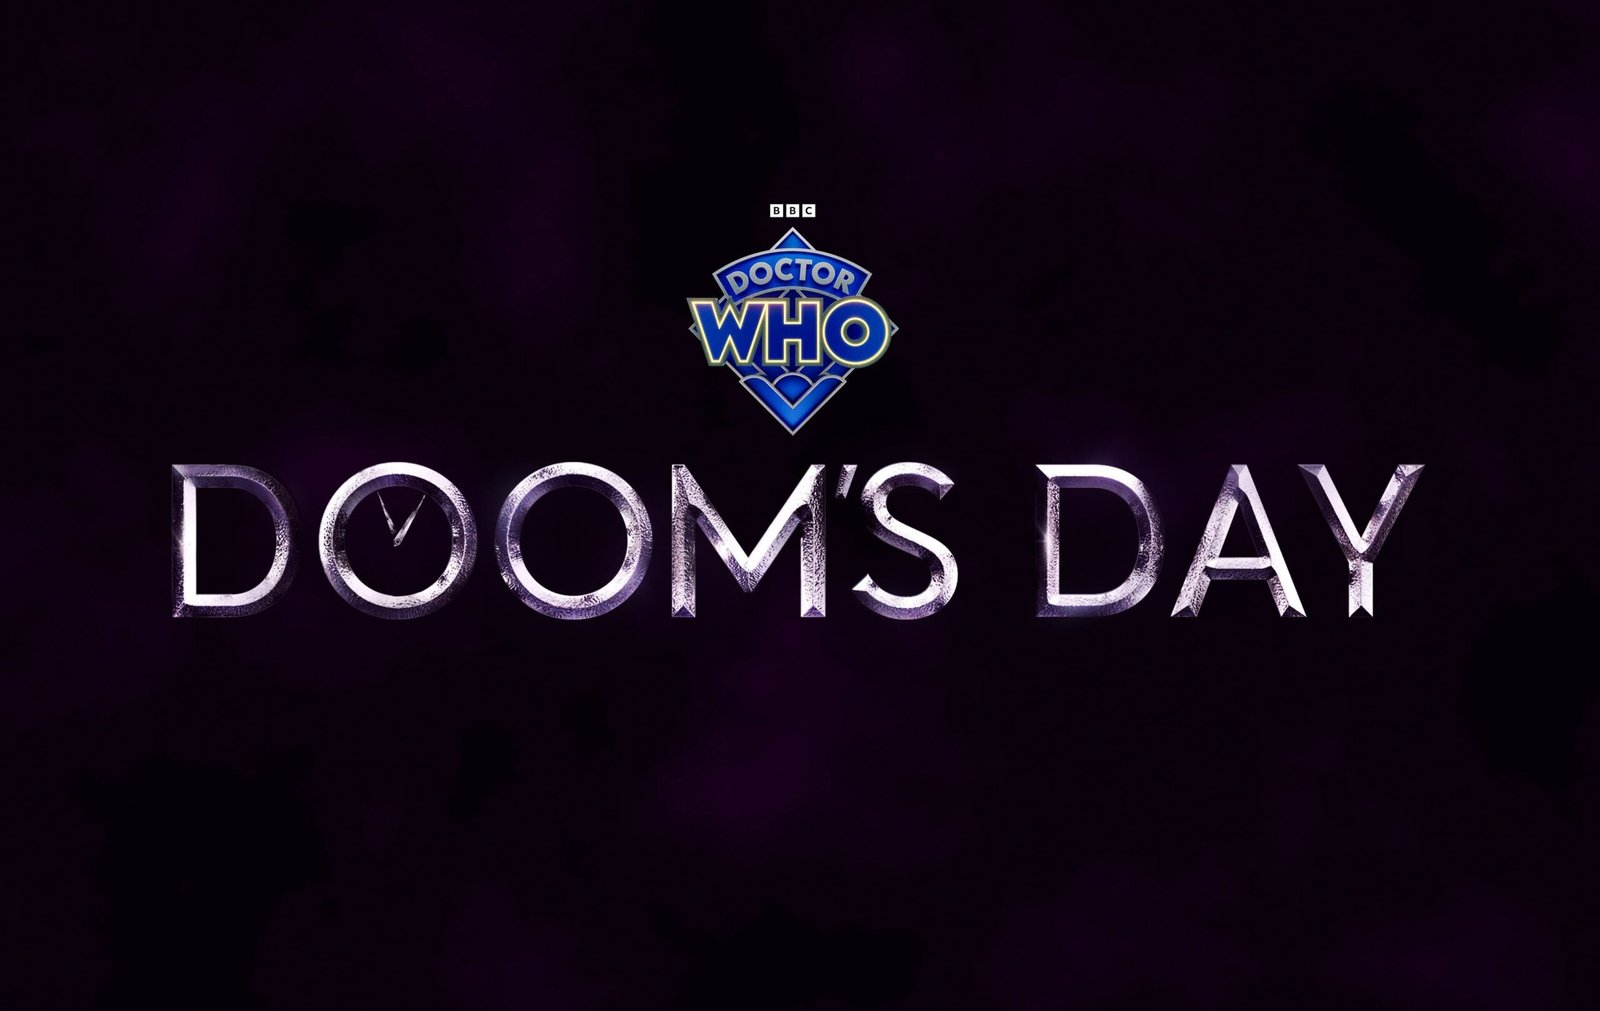 The BBC Announce Doctor Who: Doom’s Day, a New Multi-Platform Event Story